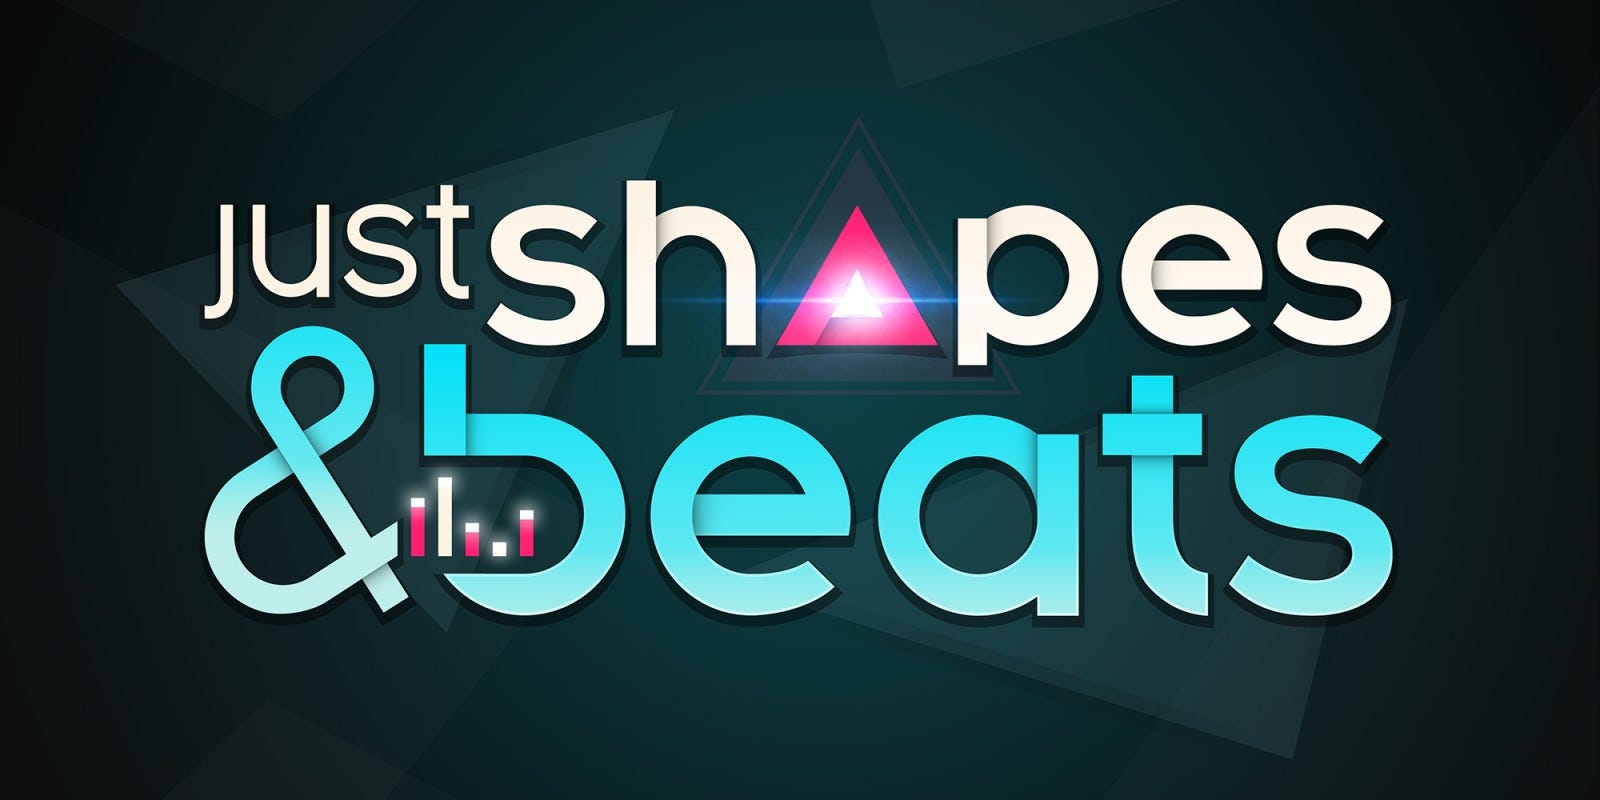 Buy Just Shapes and Beats Final Boss you Have Been DESTROYED